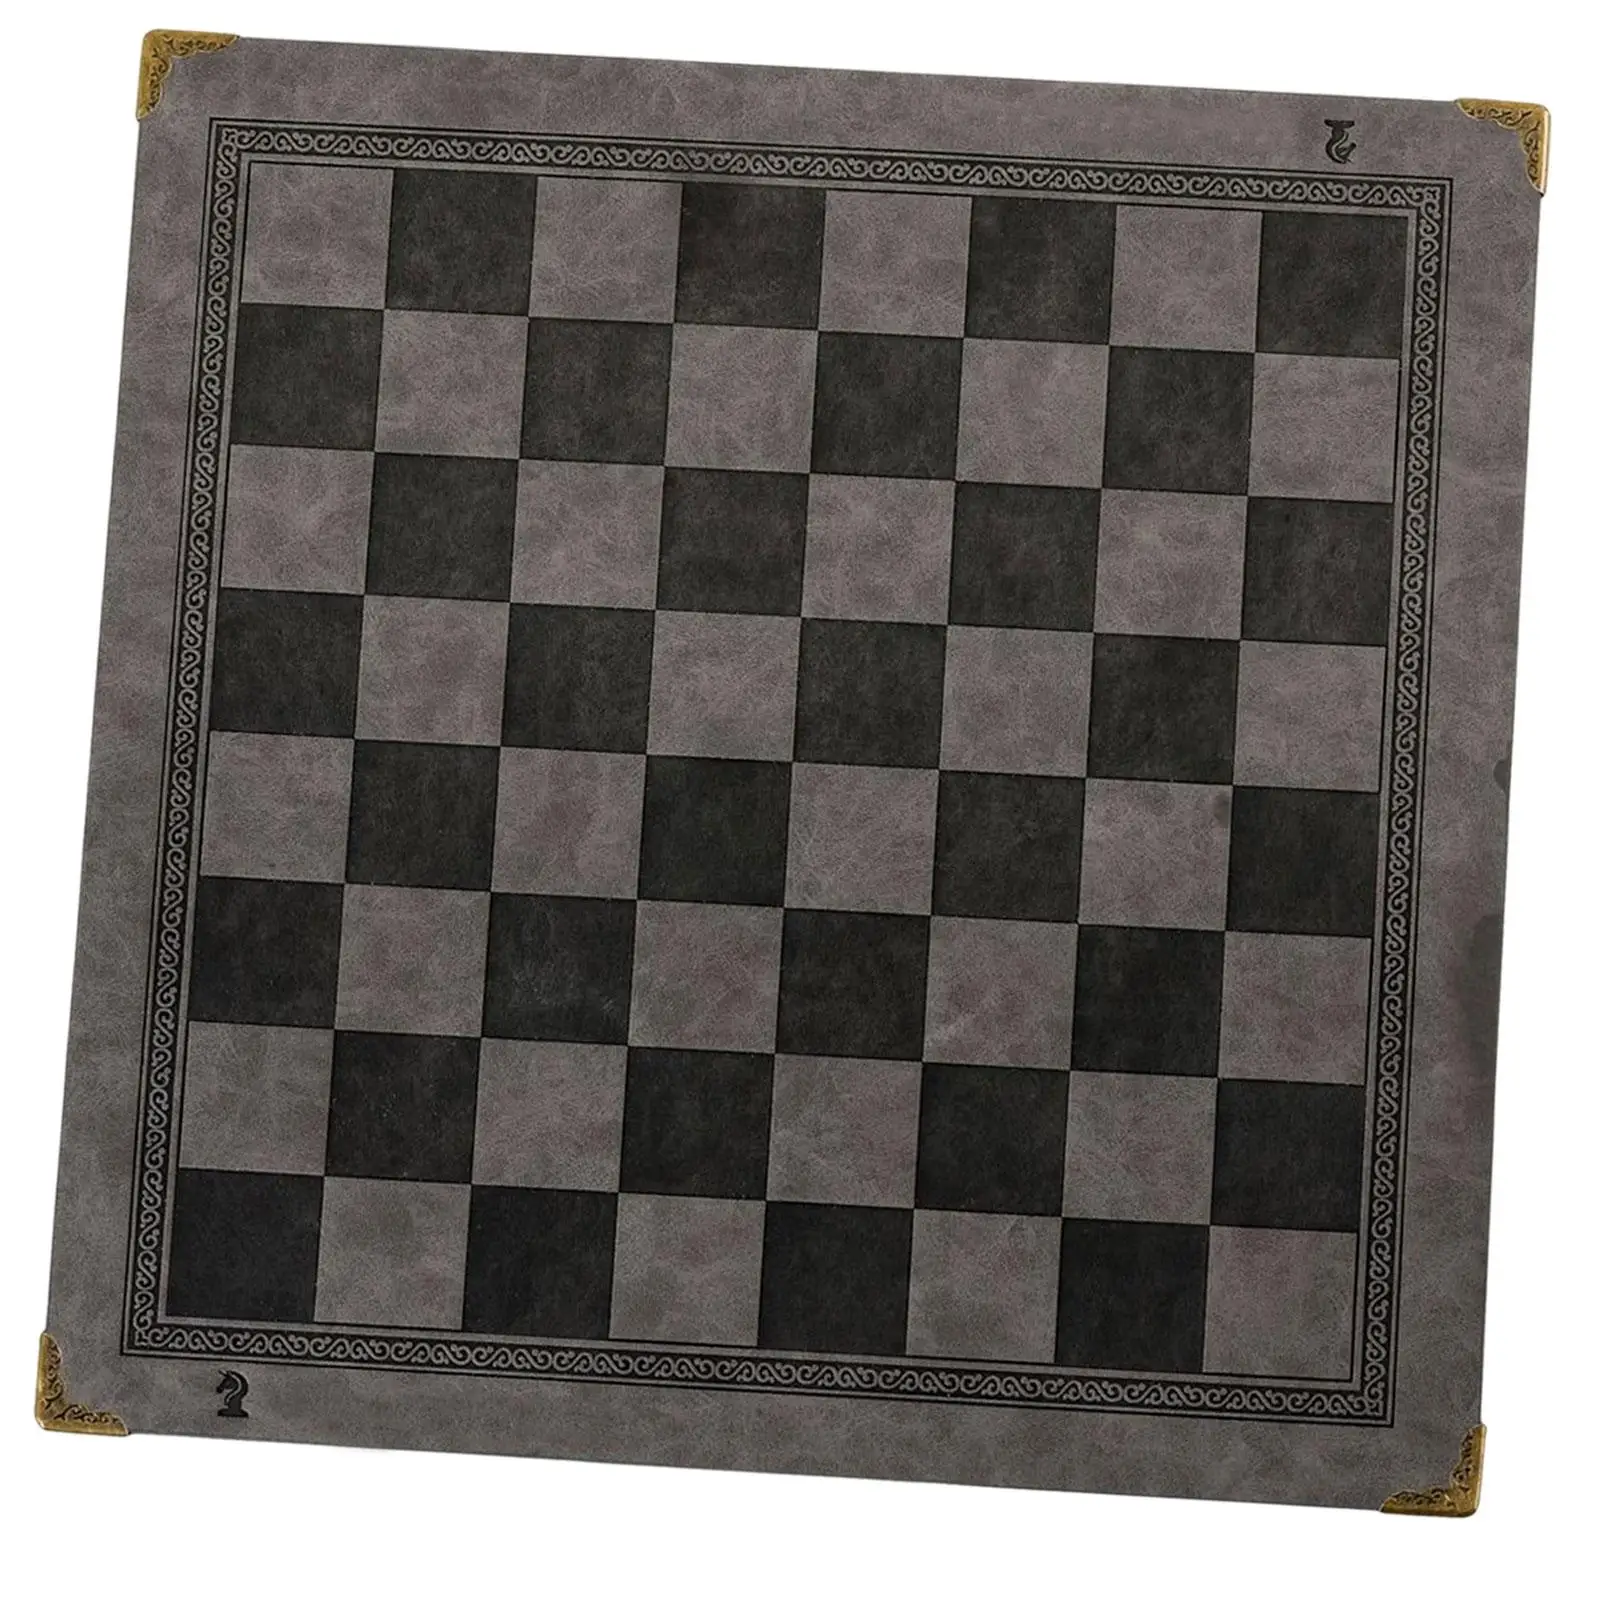 Placemat Washable Portable Wipeable Multipurpose Decorative Chessboard Mat for Park Game Counter Top Table Home Play Patio